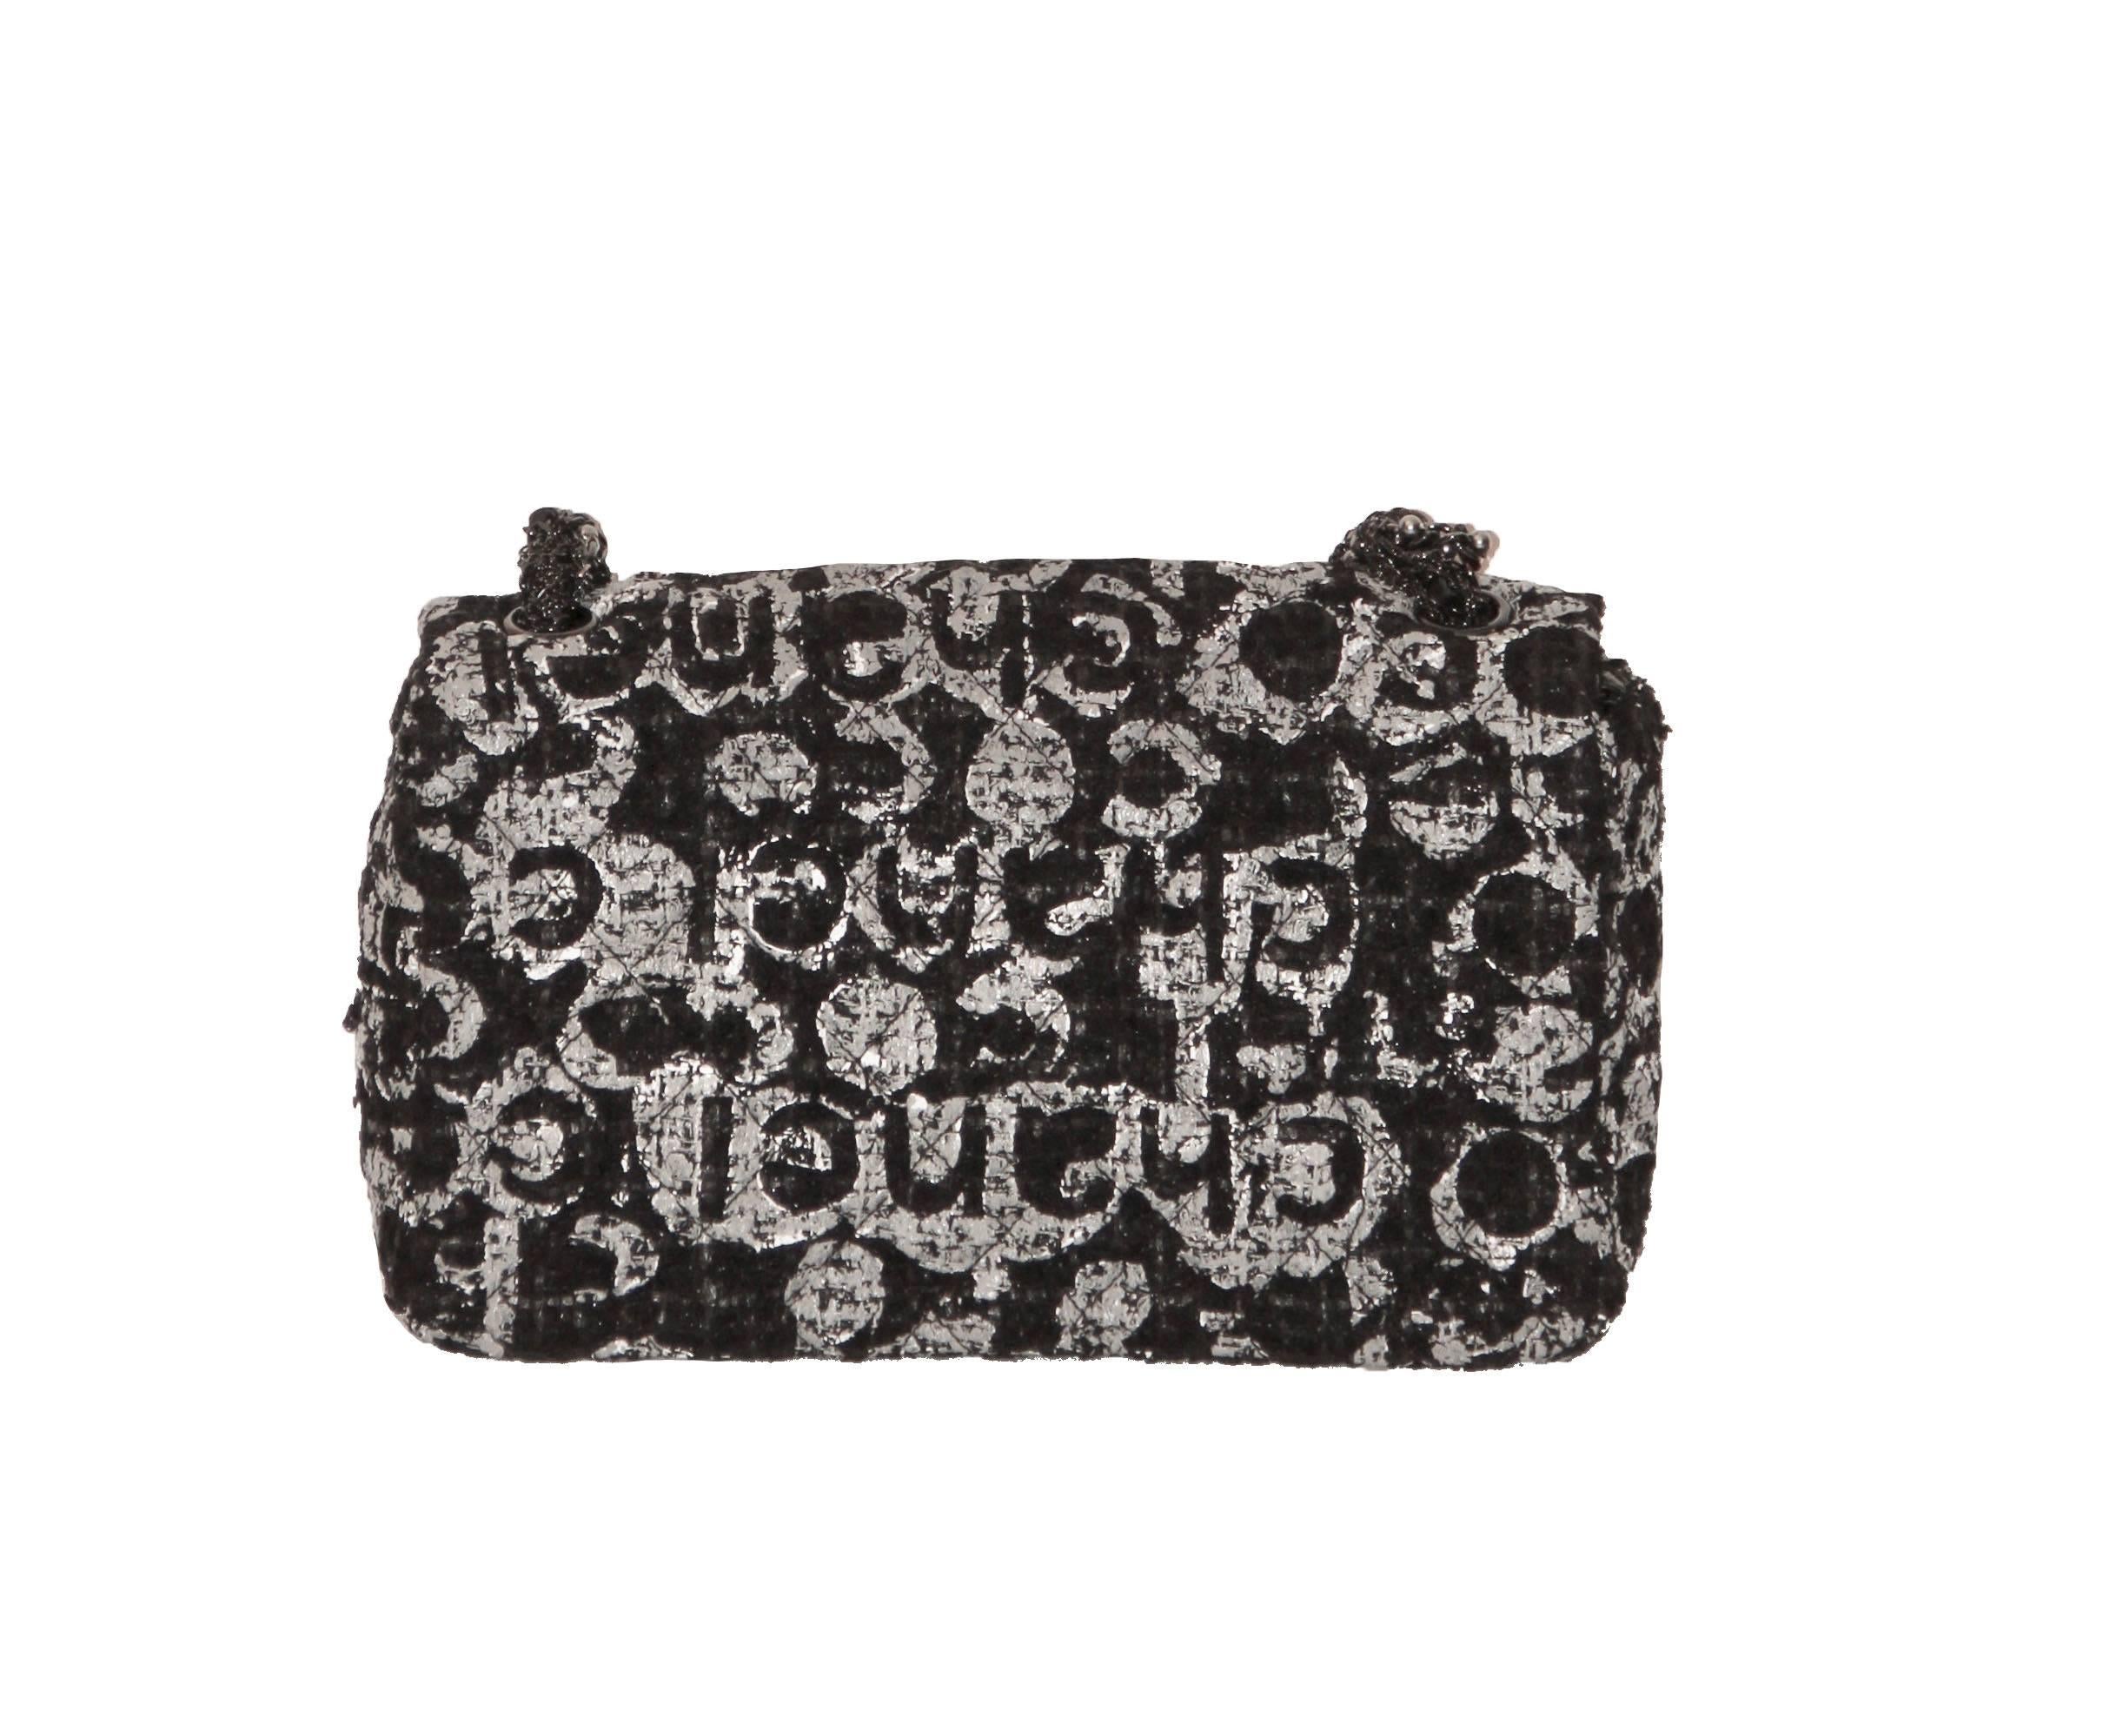 Charming and very rare Chanel Single Flap bag set in black/ white/ grey tweed with gun metal hardware and black pearls chain. The CC logo is embellished with white pearls

Year: Spring-Summer 2015
Fabric: Tweed, lining in black leather
Color: Black,